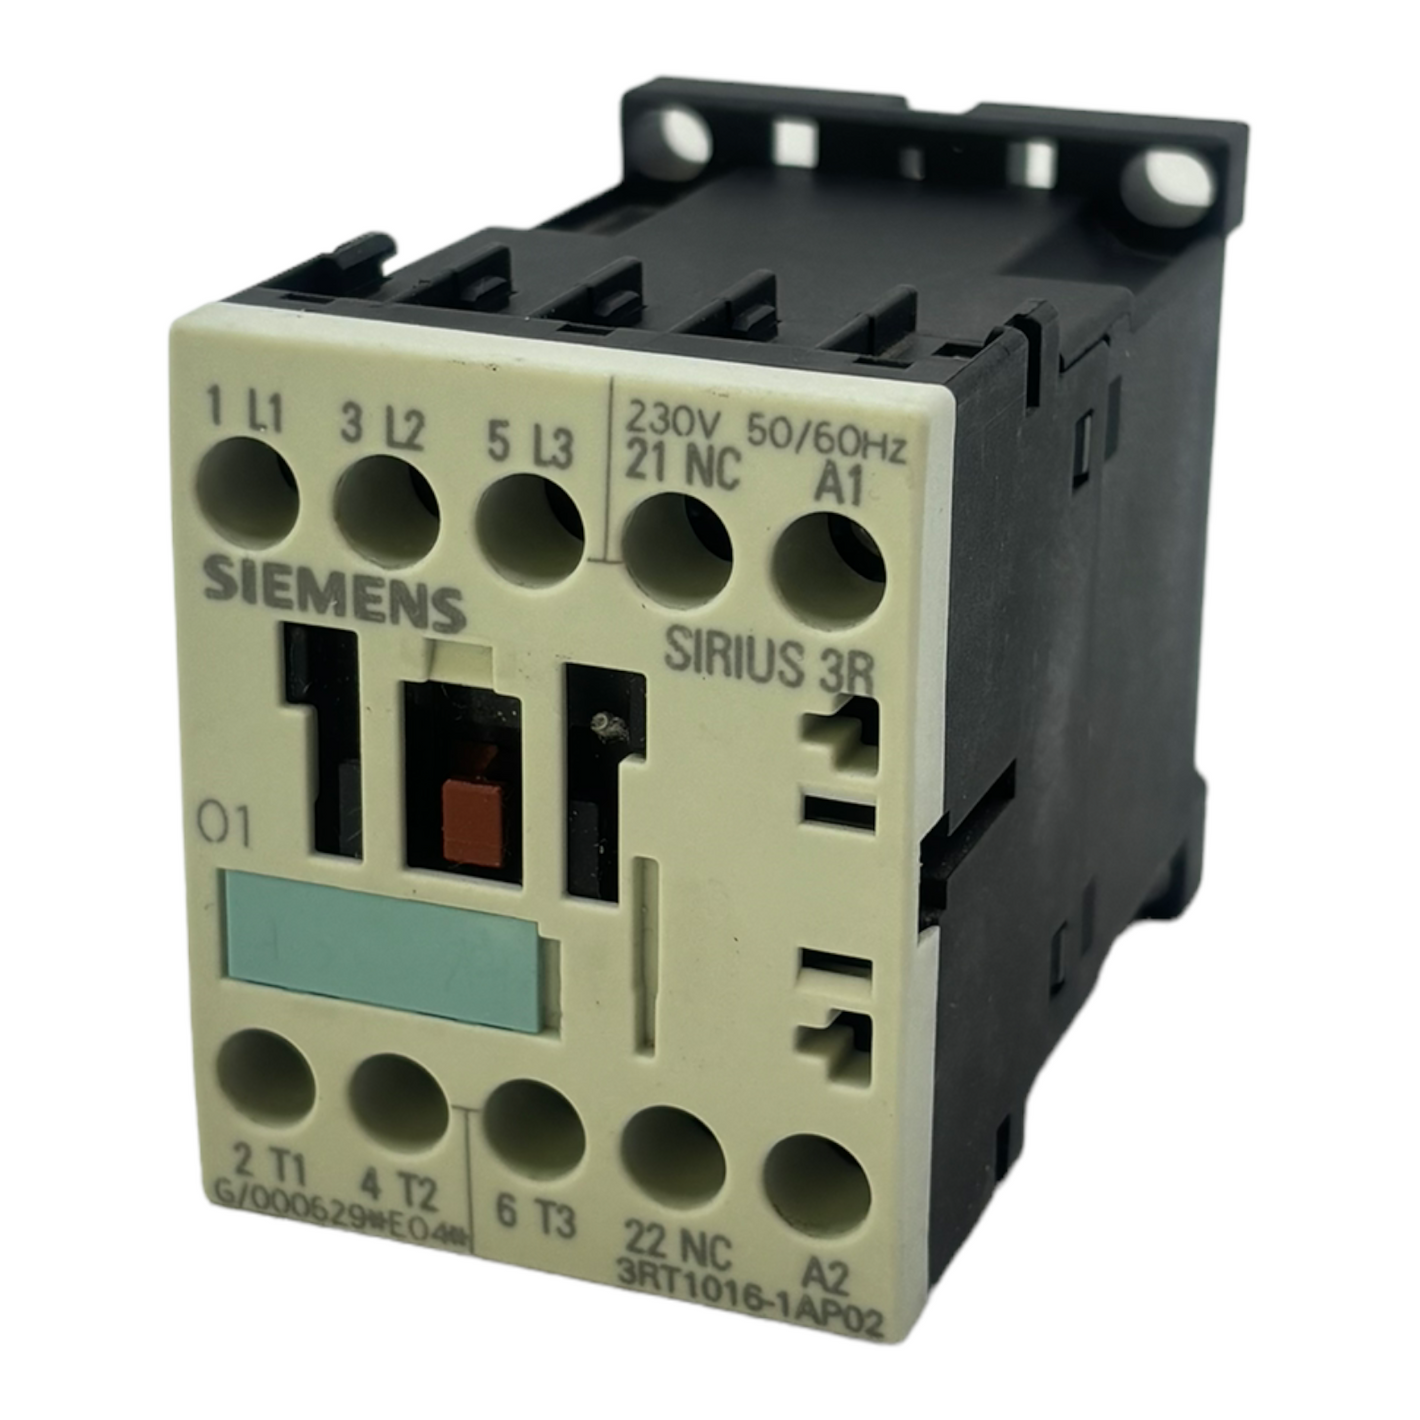 Siemens 3RT1016-1AP02 power contactor for industrial use 230V 50/60Hz